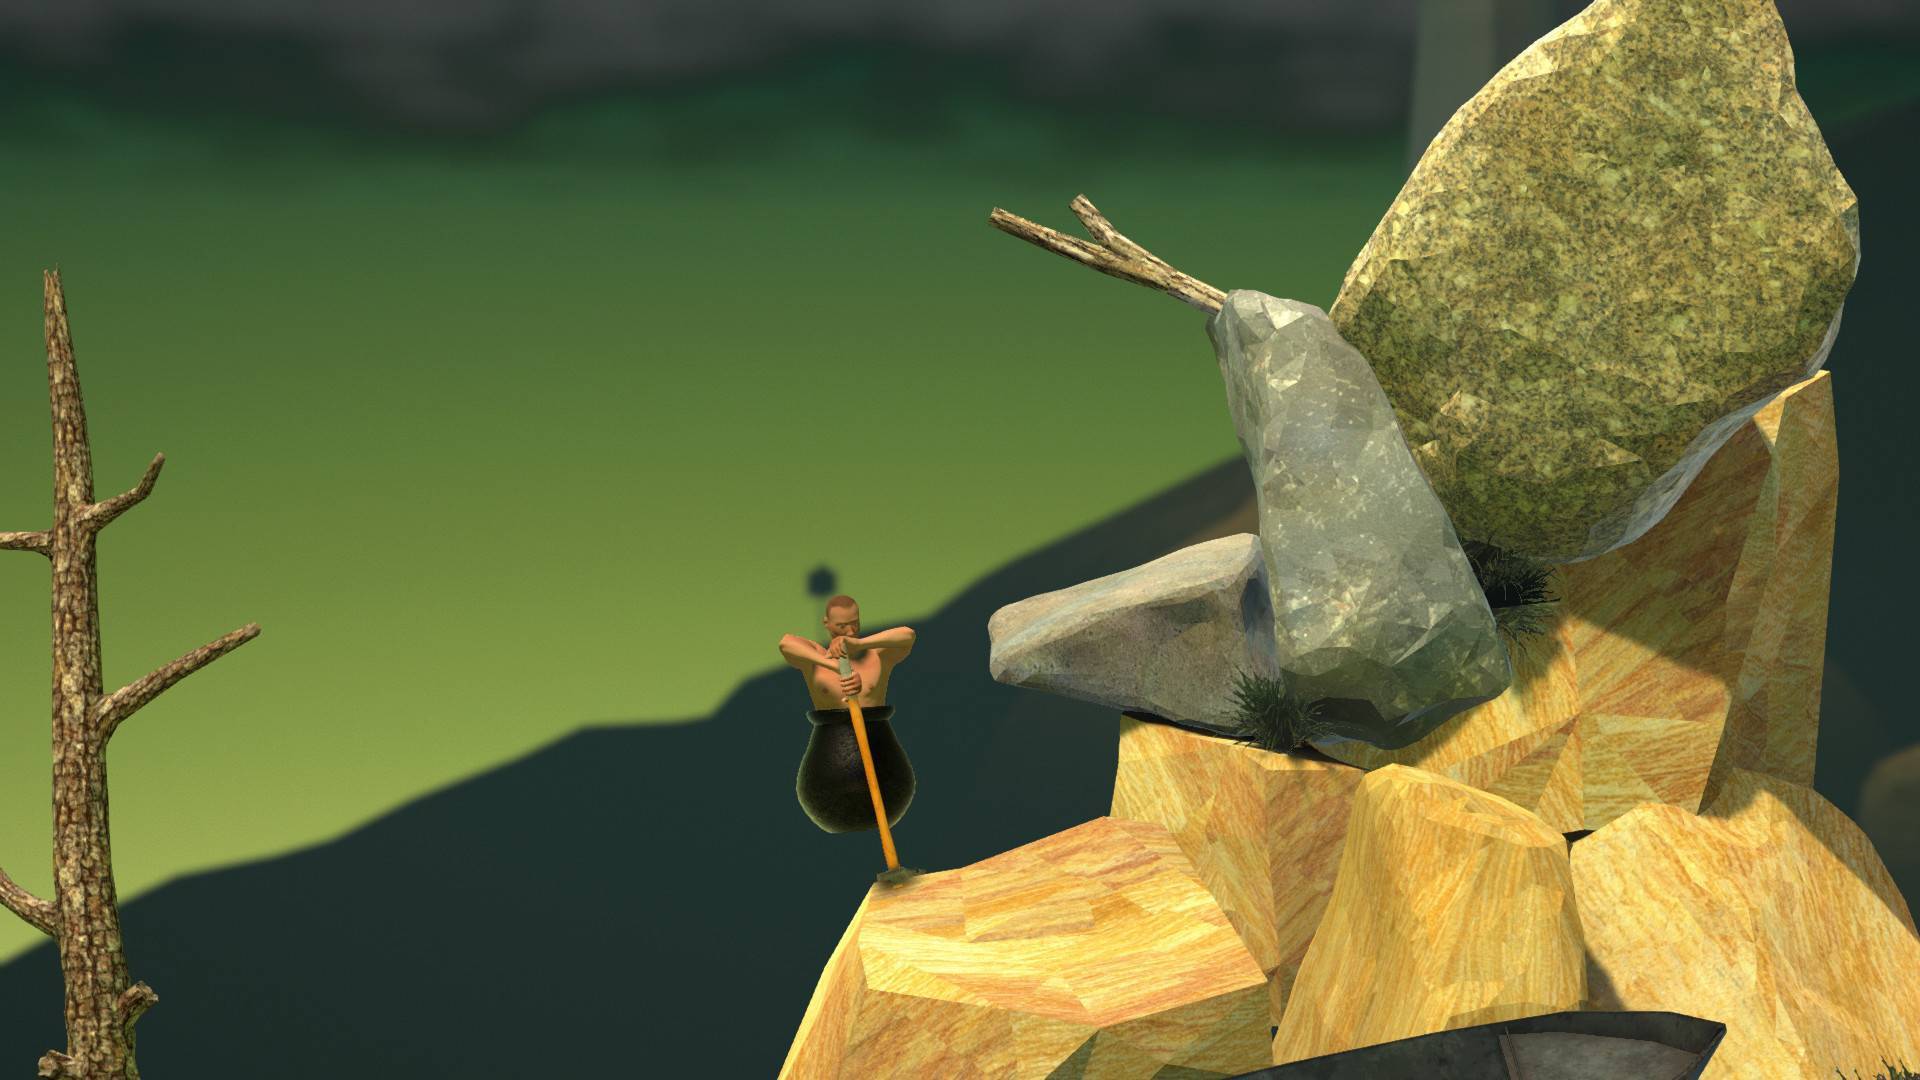 getting over it with bennett foddy free no download